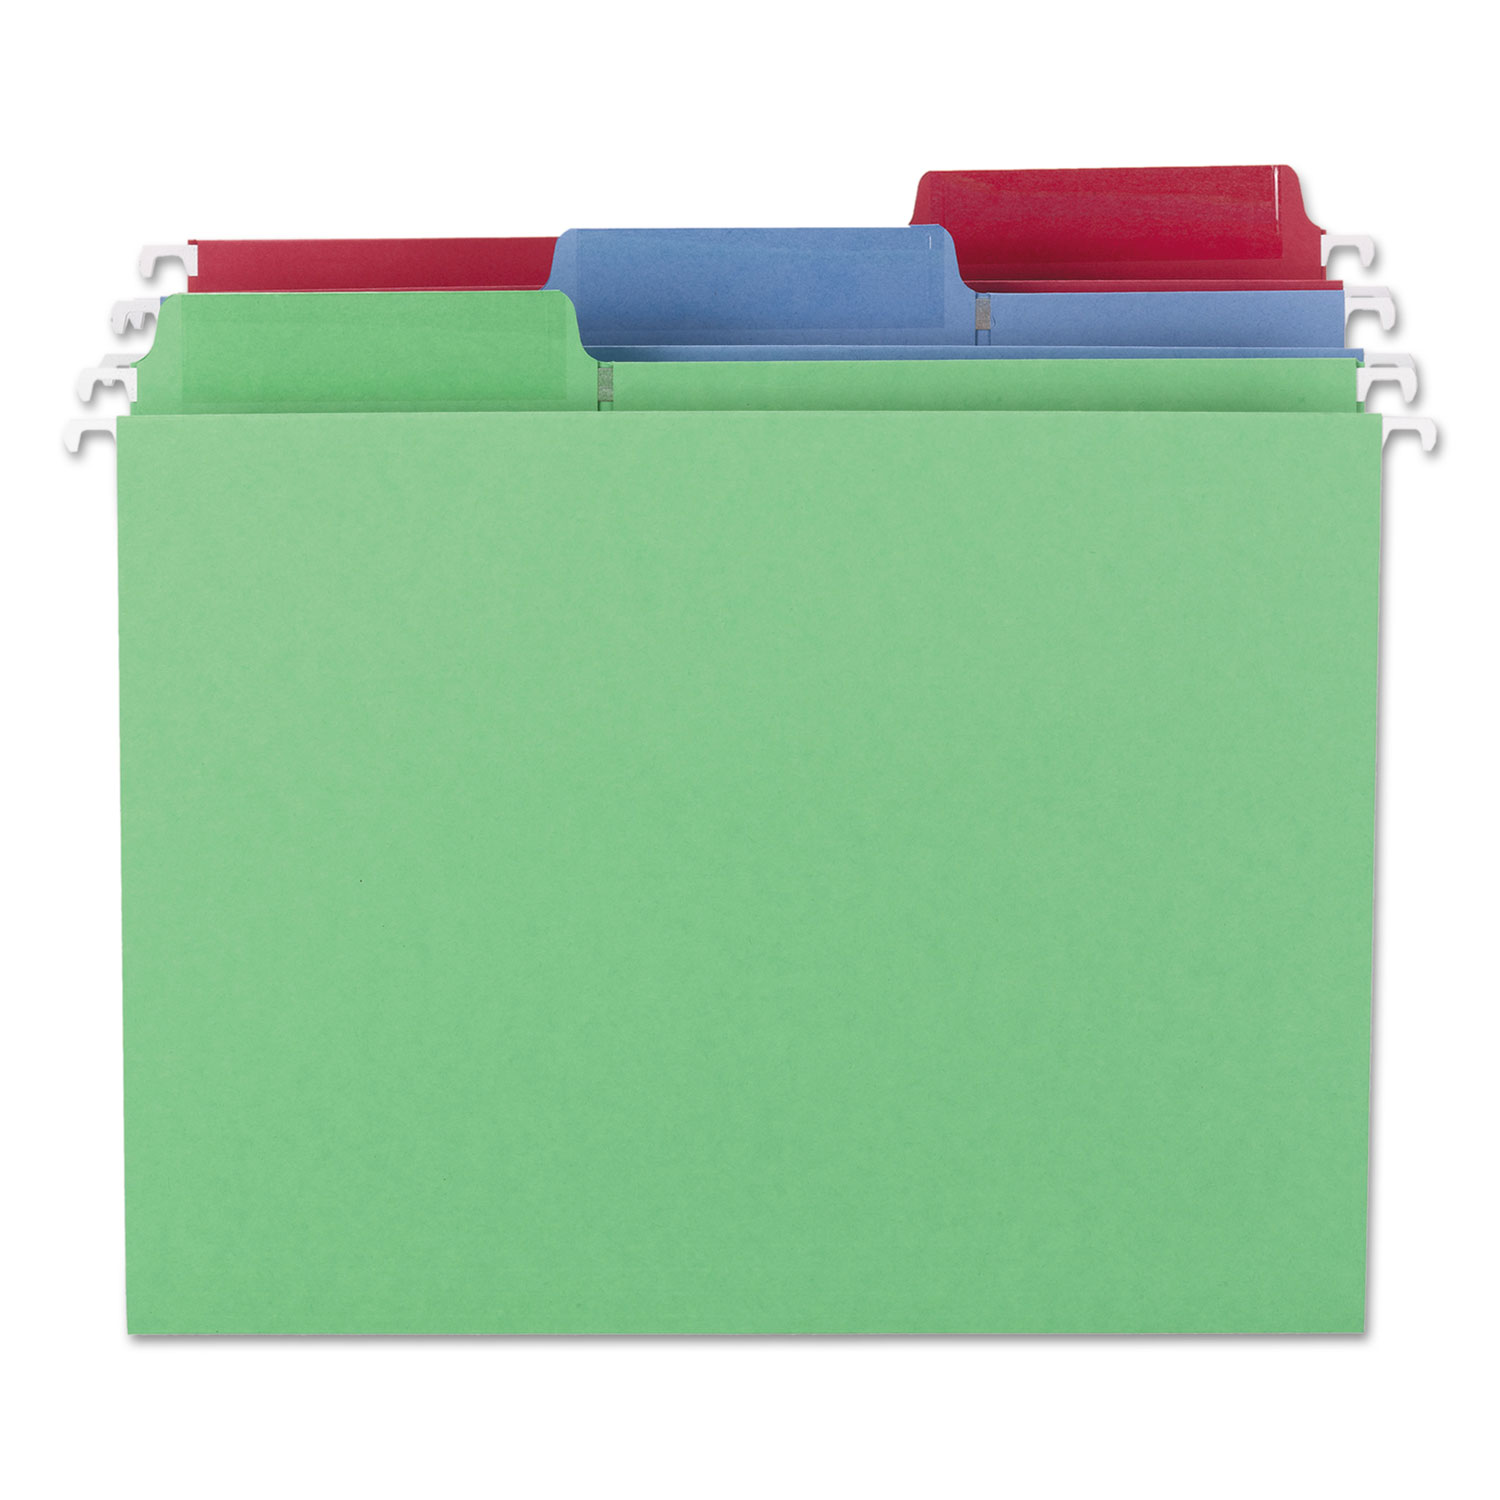 Assorted Primary Colors 18 per Box Smead Erasable FasTab Hanging File Folder 64031 Letter Size 1/3-Cut Built-in Tab Primary Color Assortment 